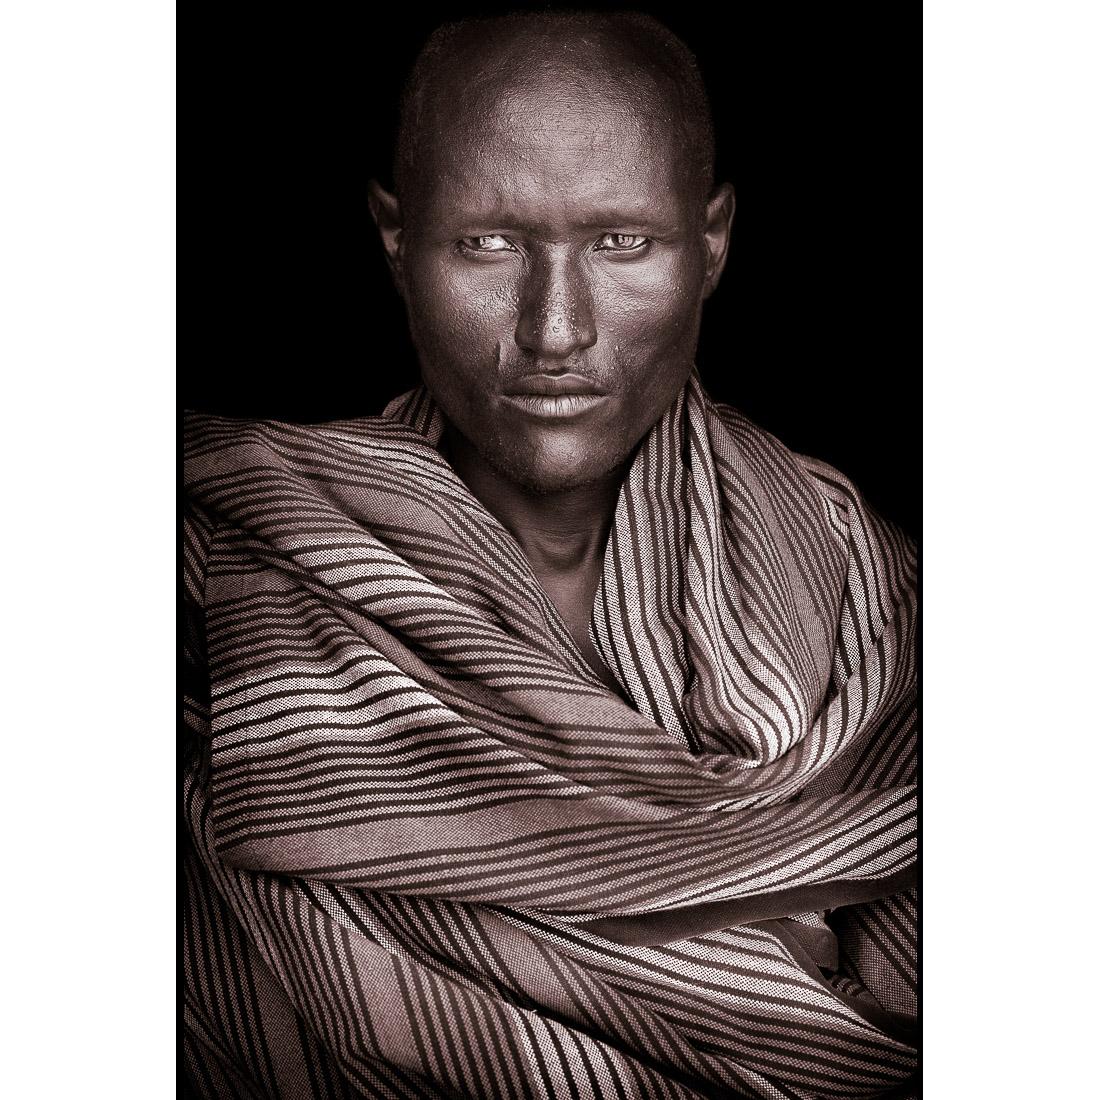 A portrait of Acuan, a Turkana man from northern Kenya in 2019.

John Kenny’s work is all shot on location in some of the remotest corners of Africa. His images are all taken with natural light and his subjects in their day to day attire.

The